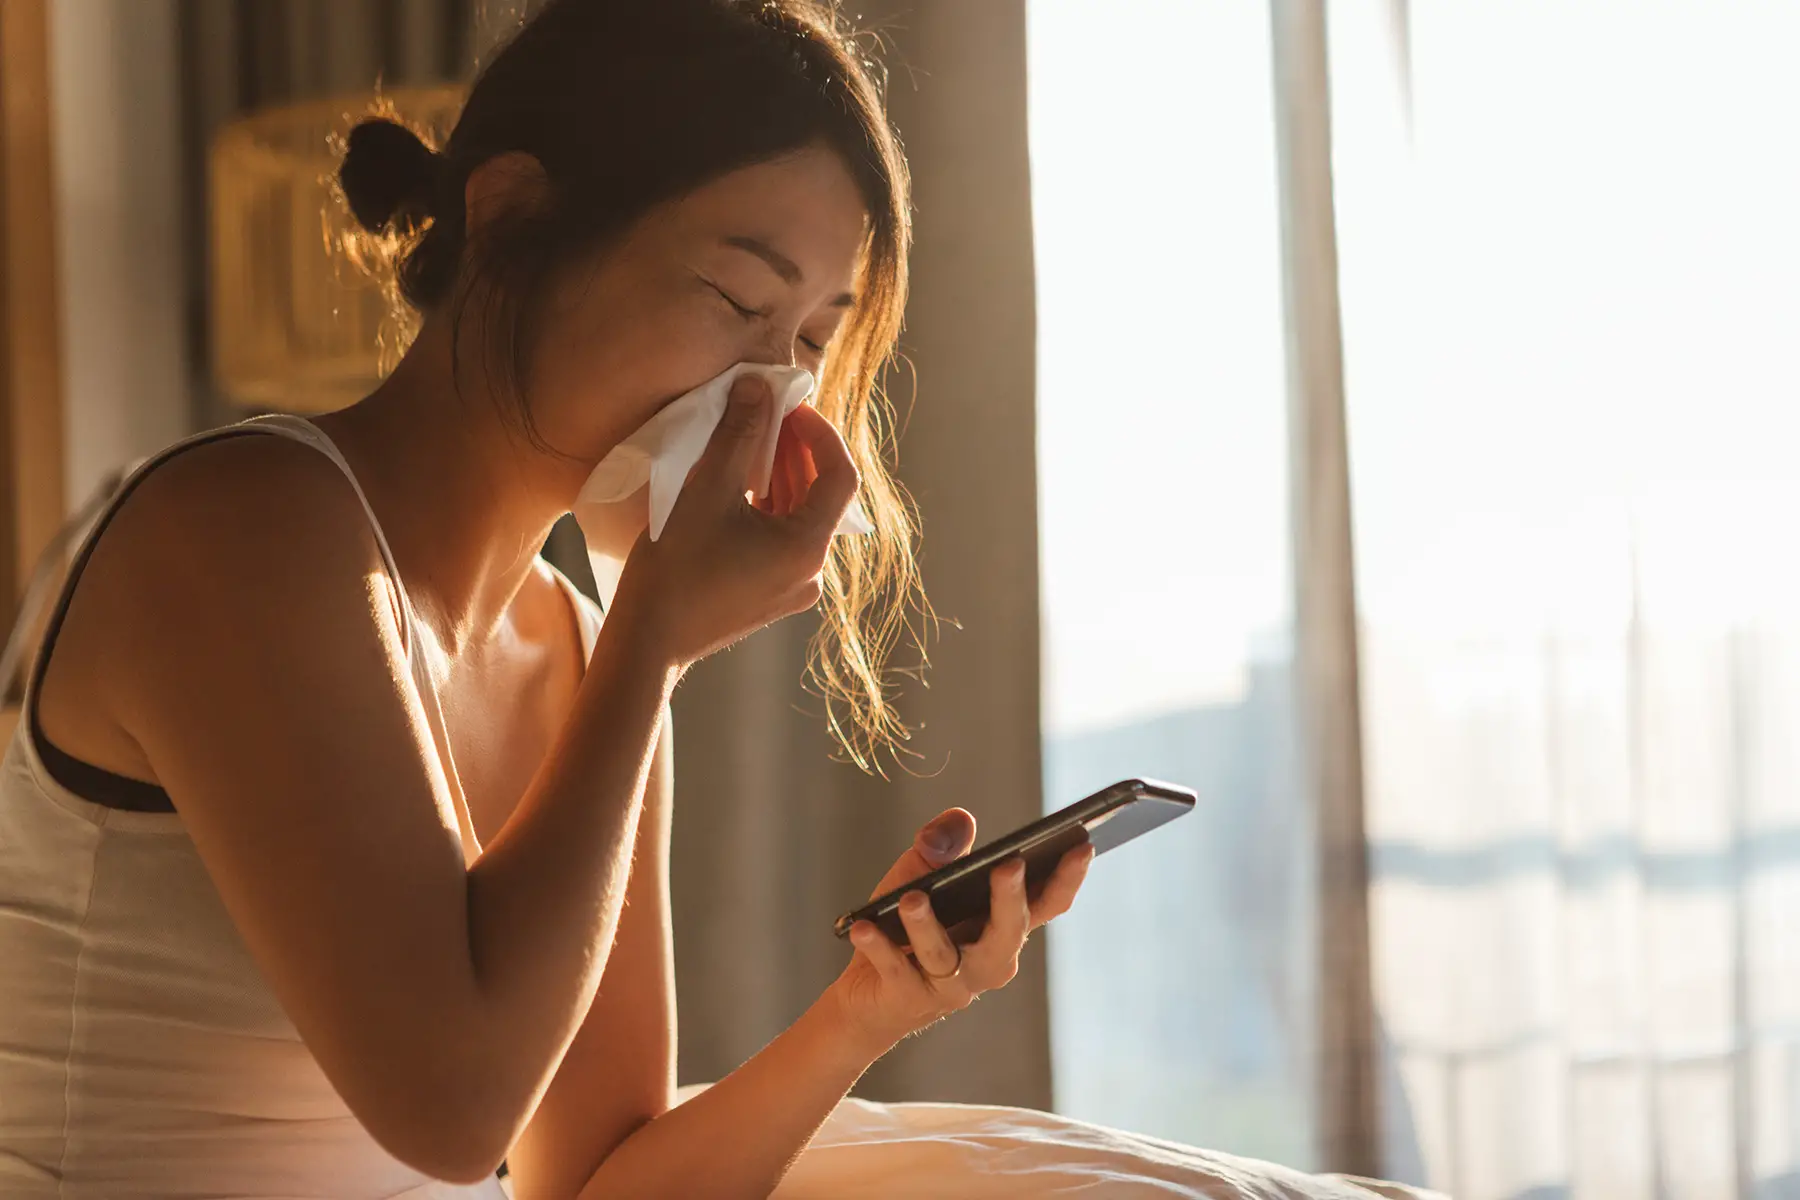 Woman sits in bed sick, blowing her nose while holding her phone